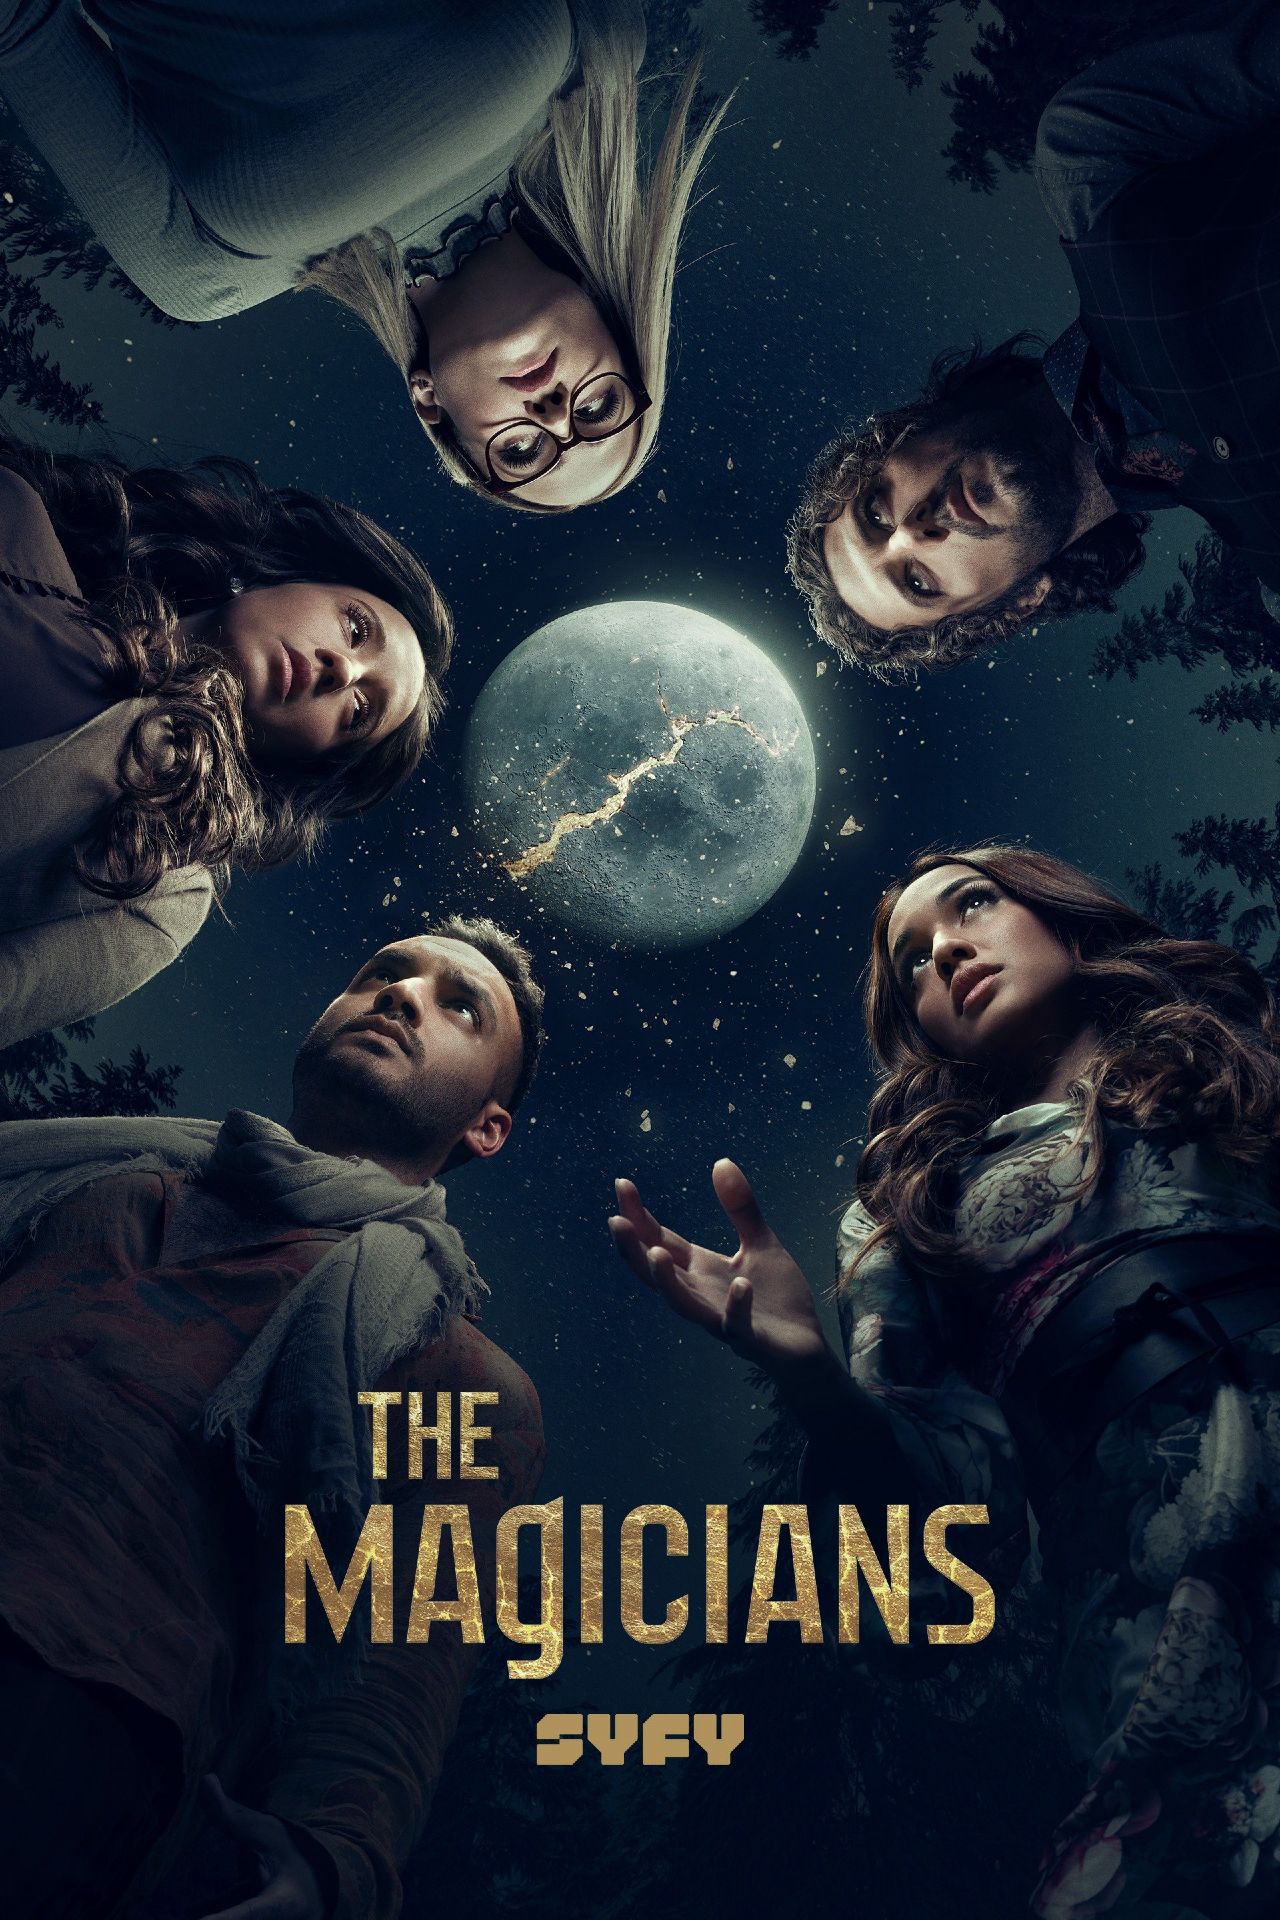 The Magicians SyFy Poster